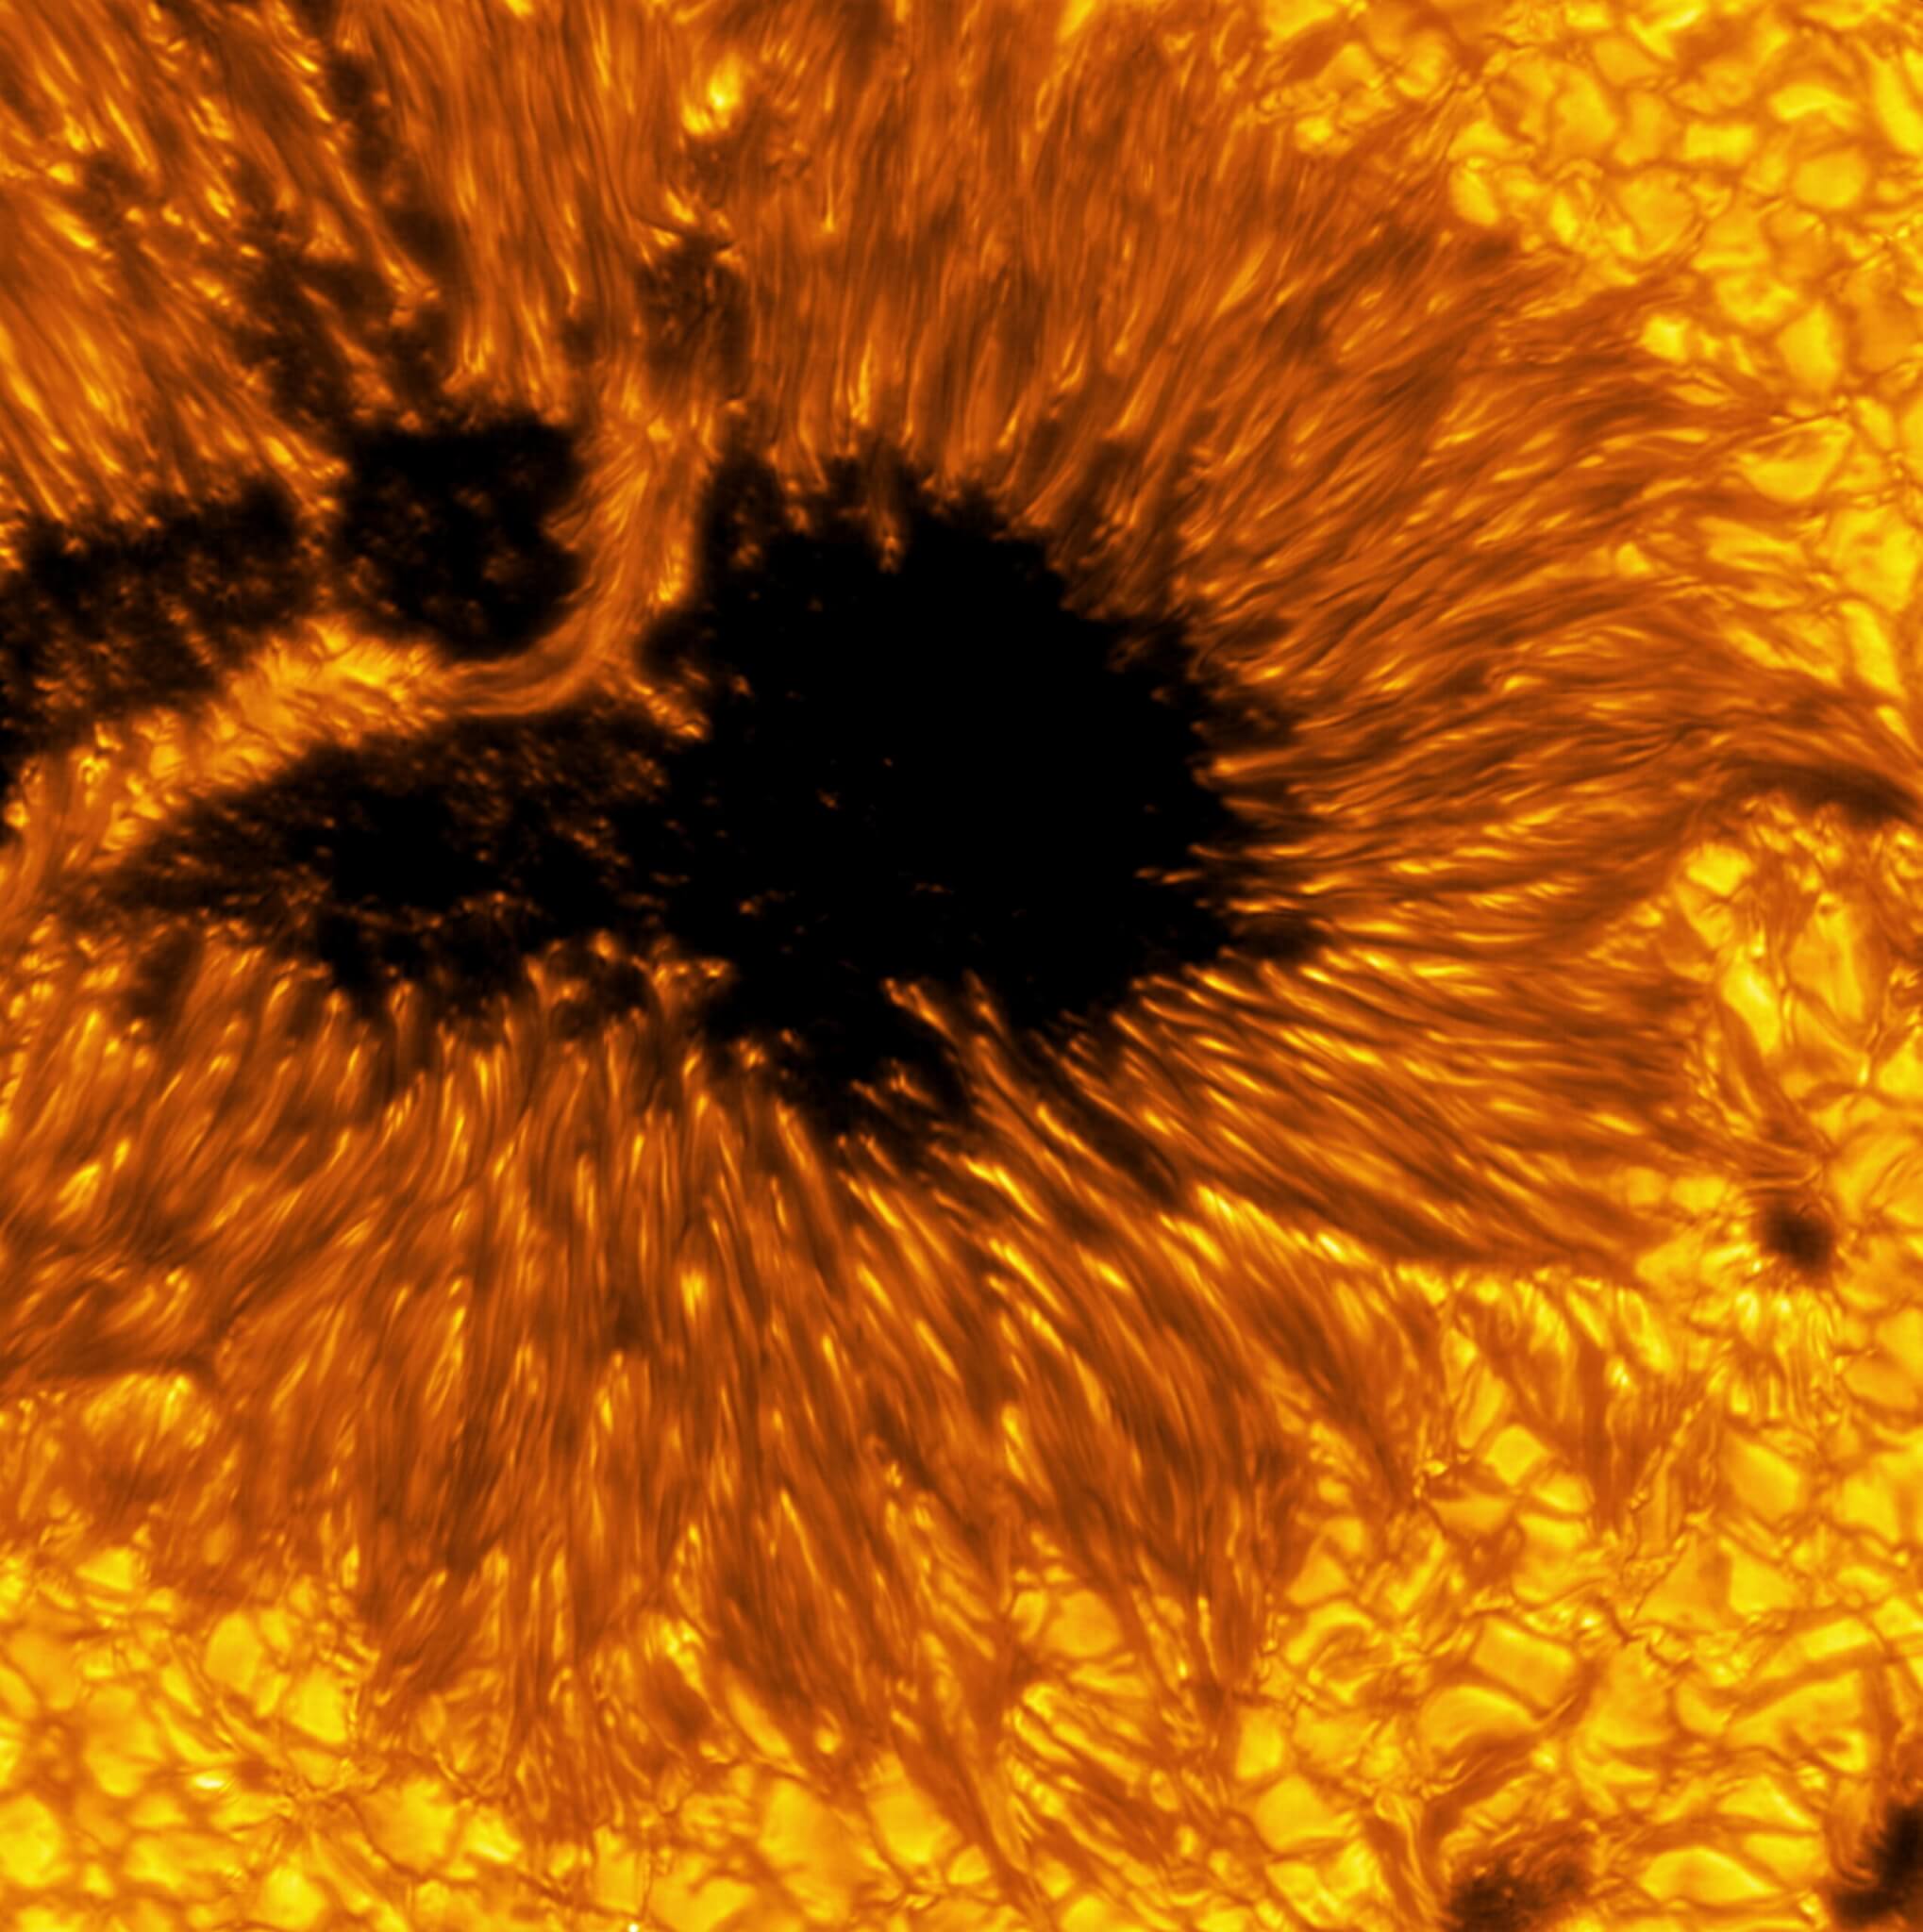 A detailed example of a light bridge crossing a sunspot’s umbra.